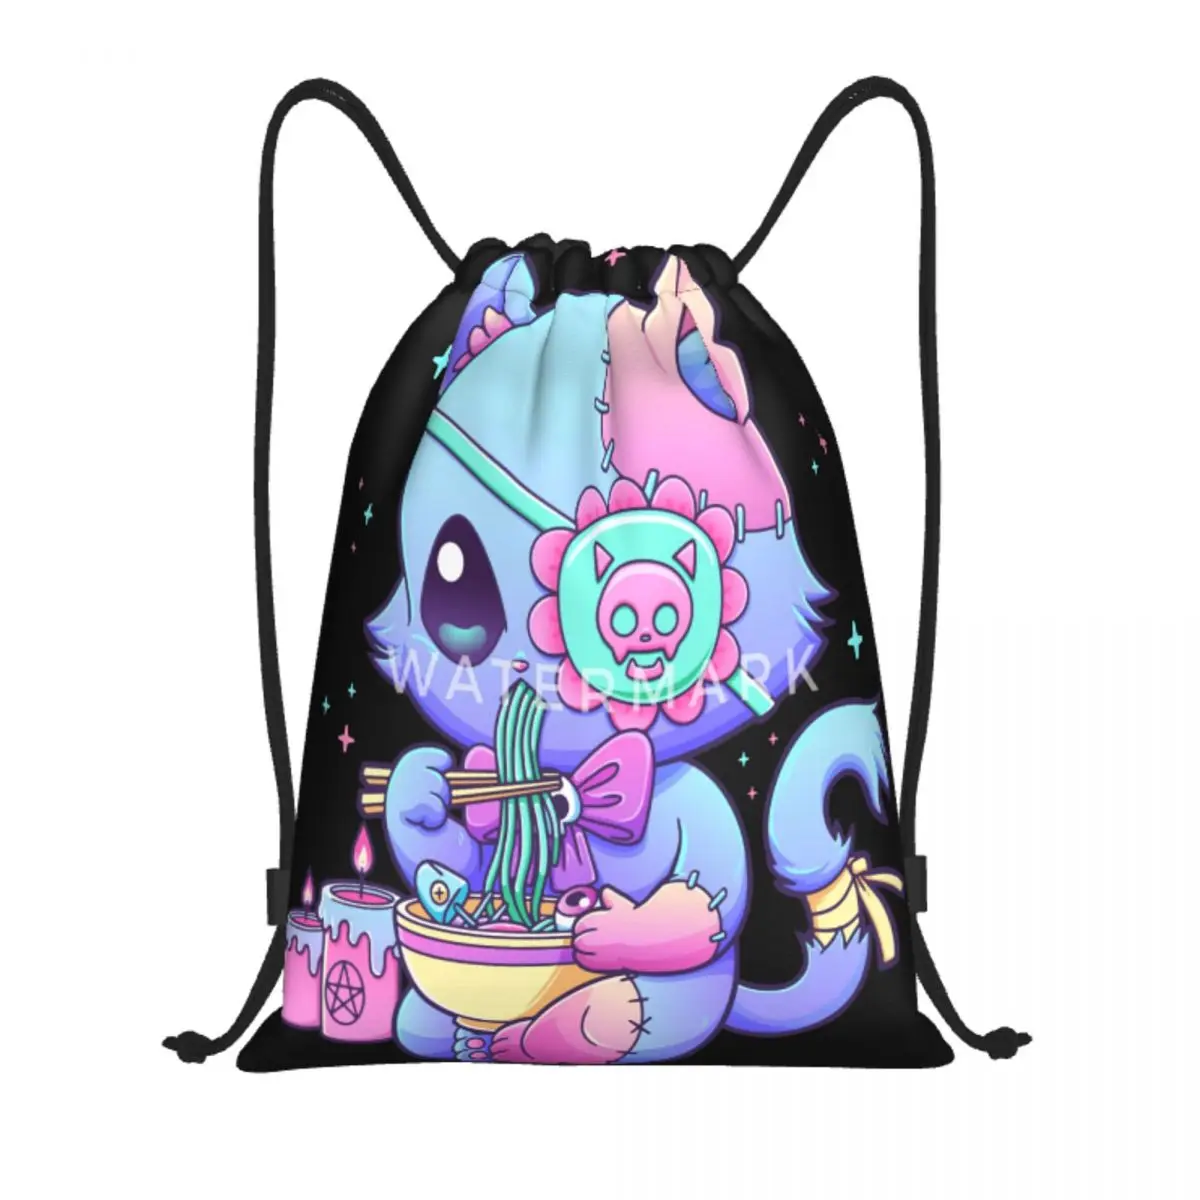 Pastel Goth Aesthetic Kawaii Creepy Cat Eating Ram Drawstring Bags,Backpack Holiday With Drawstring Bag For Daily Unisex